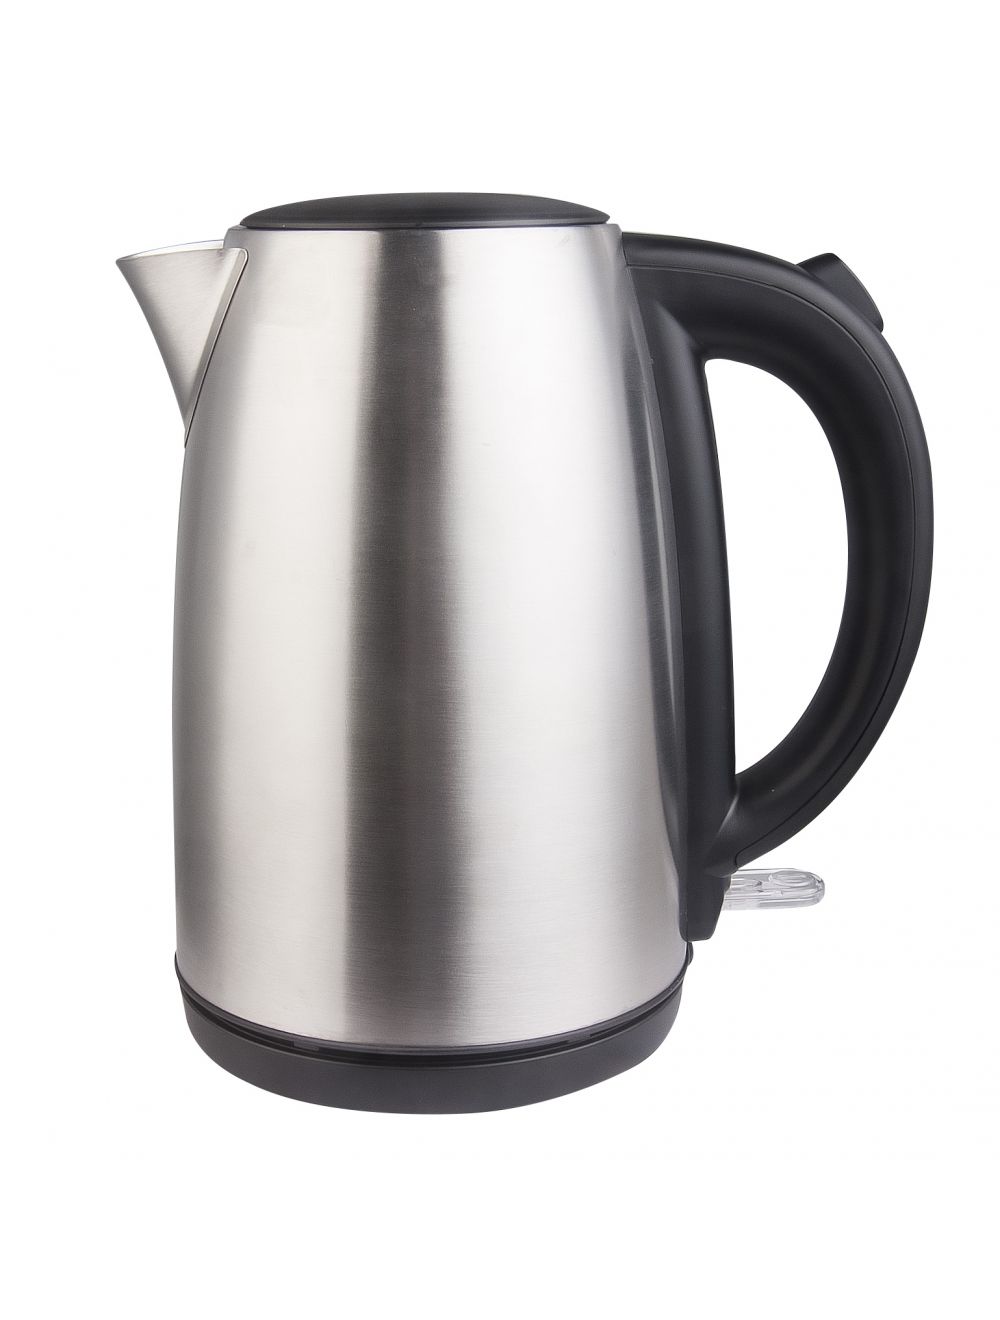 Geepas Cordless Electric Kettle 2200W GK38021UK Silver